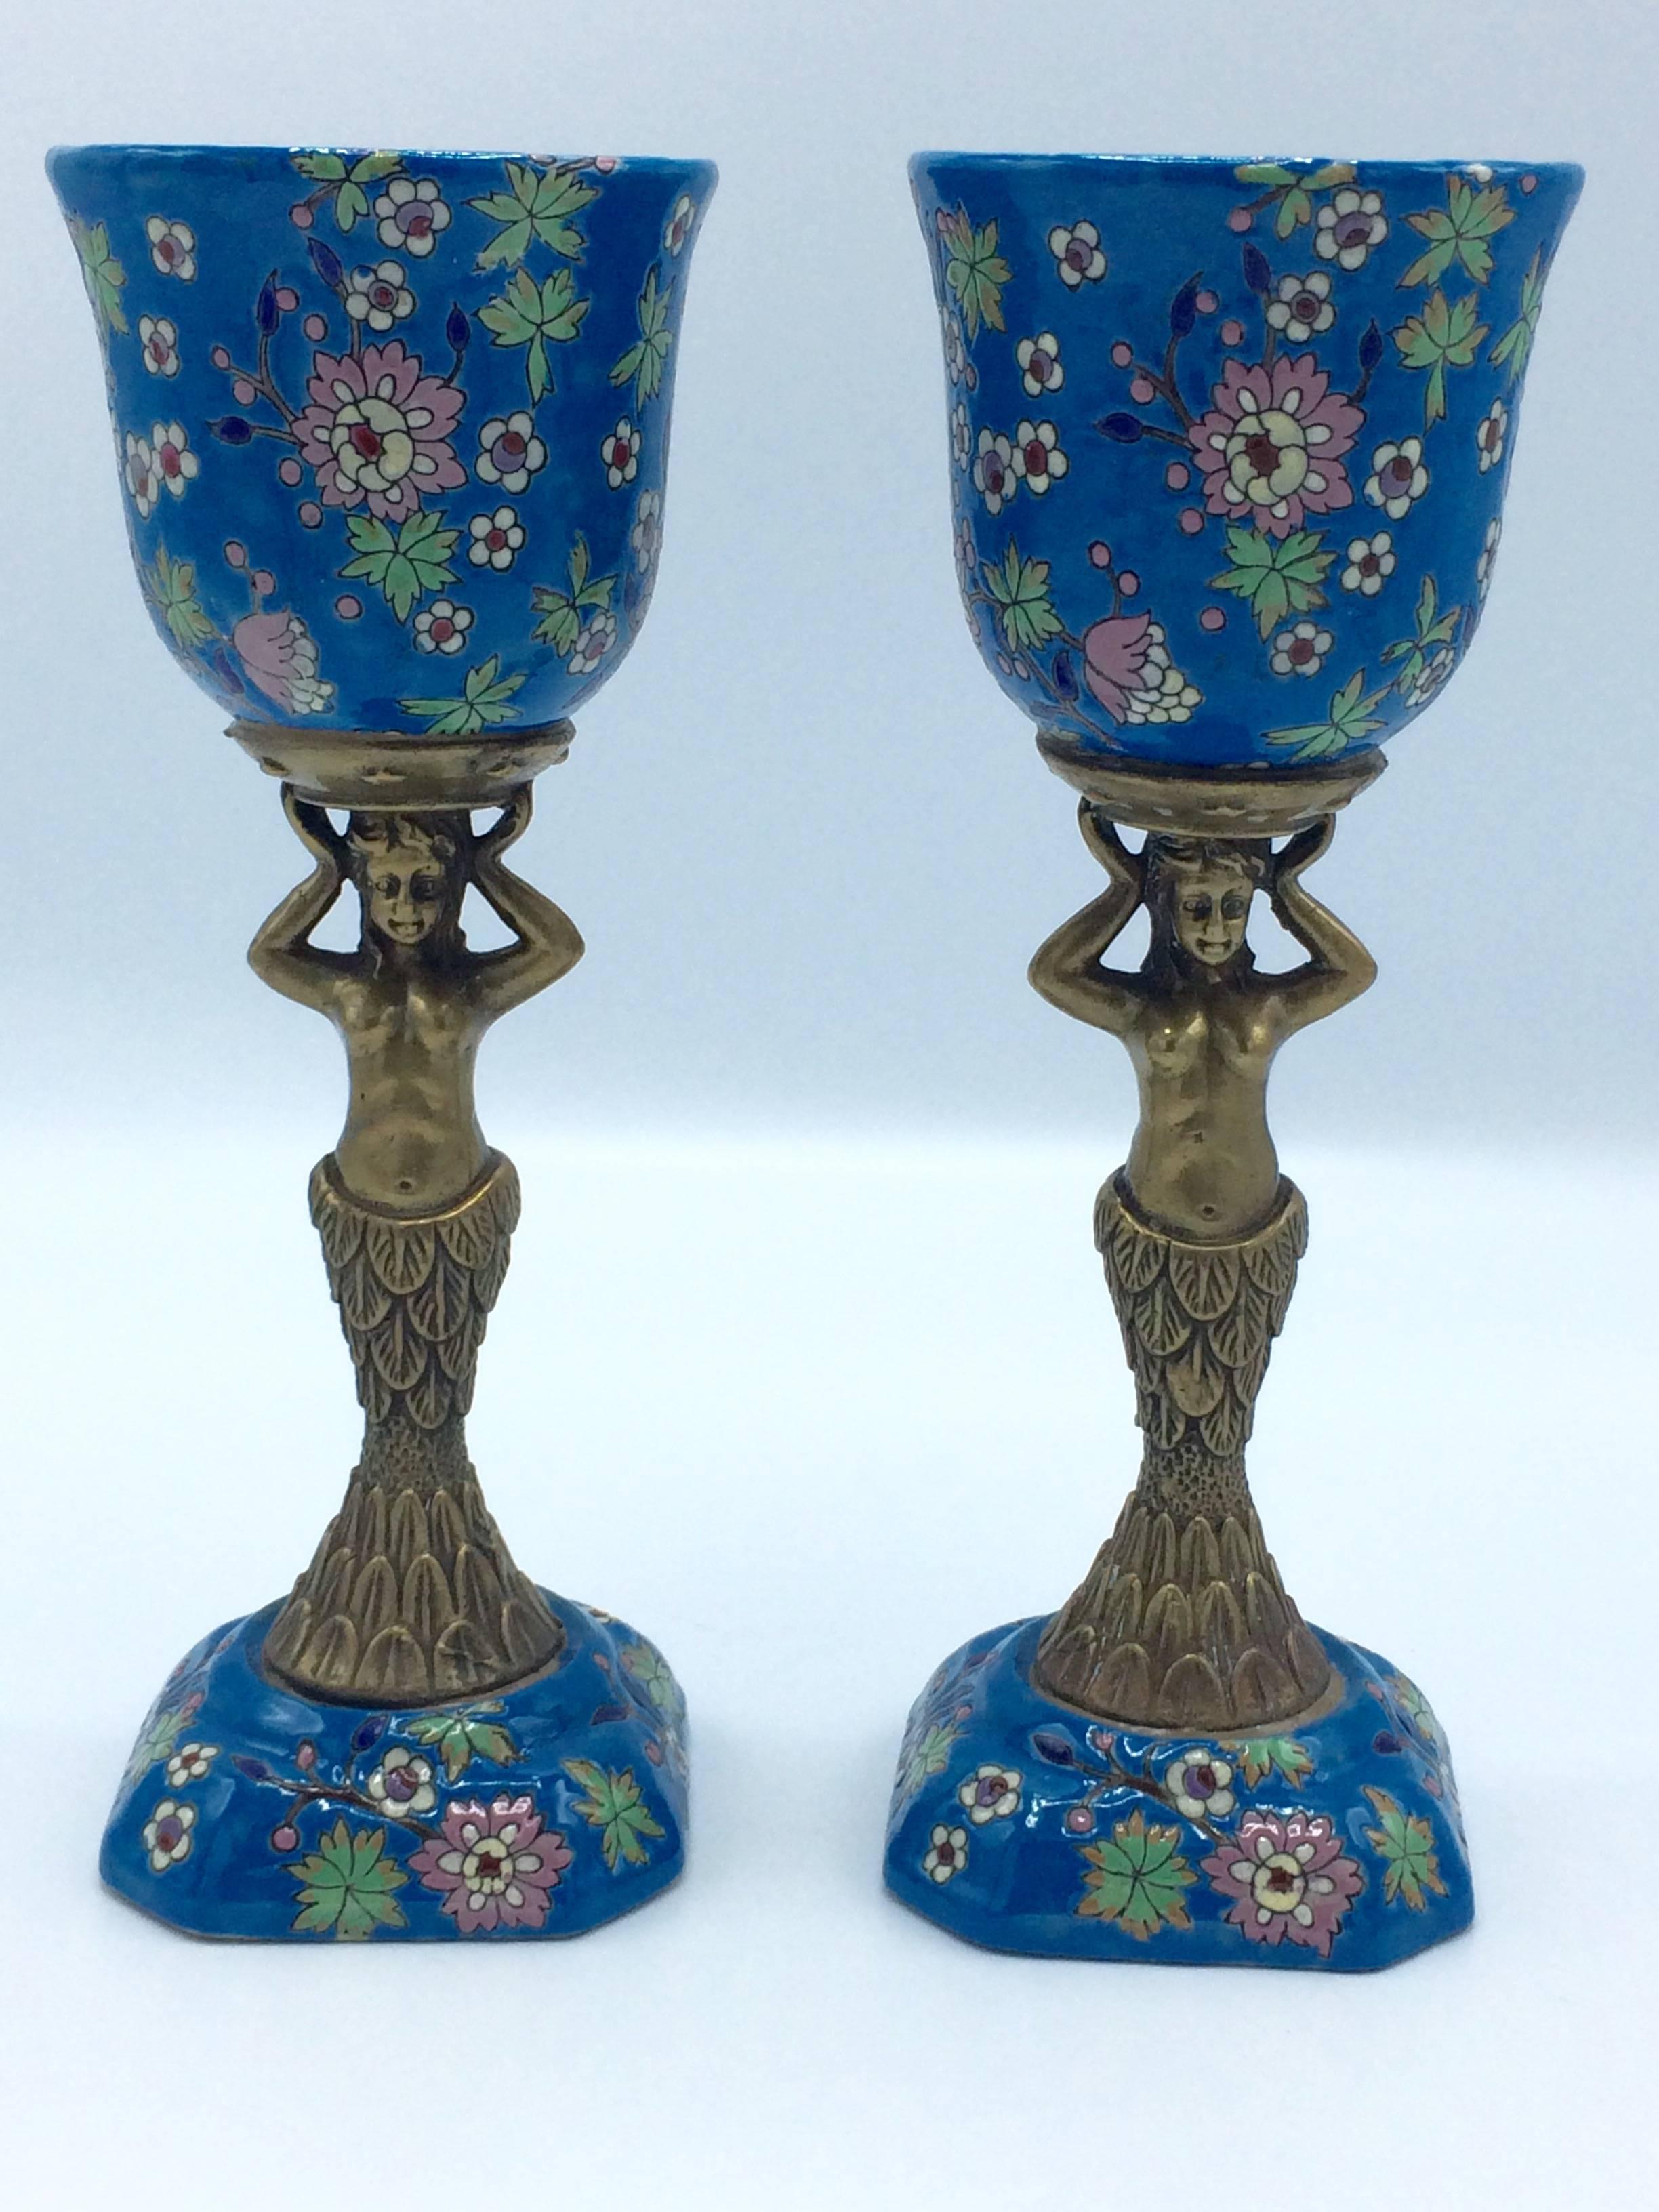 For your consideration,

A colorful pair of Longwy chalices from France. These little vases or vessels dress up very nicely with a small low hanging plant.

They are two detailed brass mermaid figurines carrying a cup/chalice with the typical